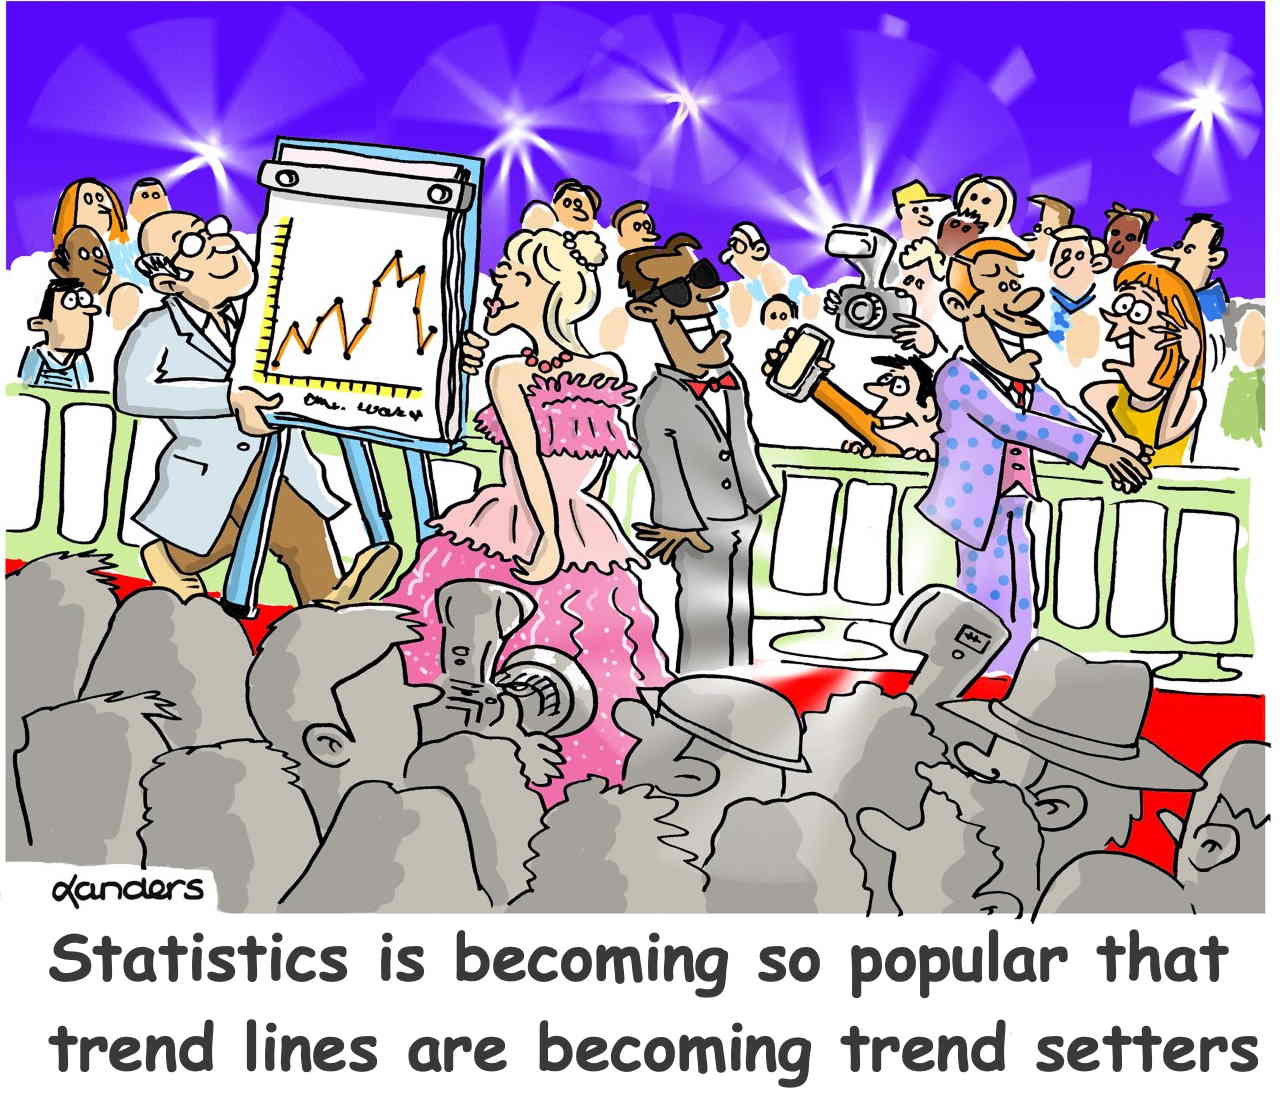 cartoon showing a red carpet event where one person is holding a time series plot.  Caption says: Statistics is becoming so popular that trend lines are becoming trend setters